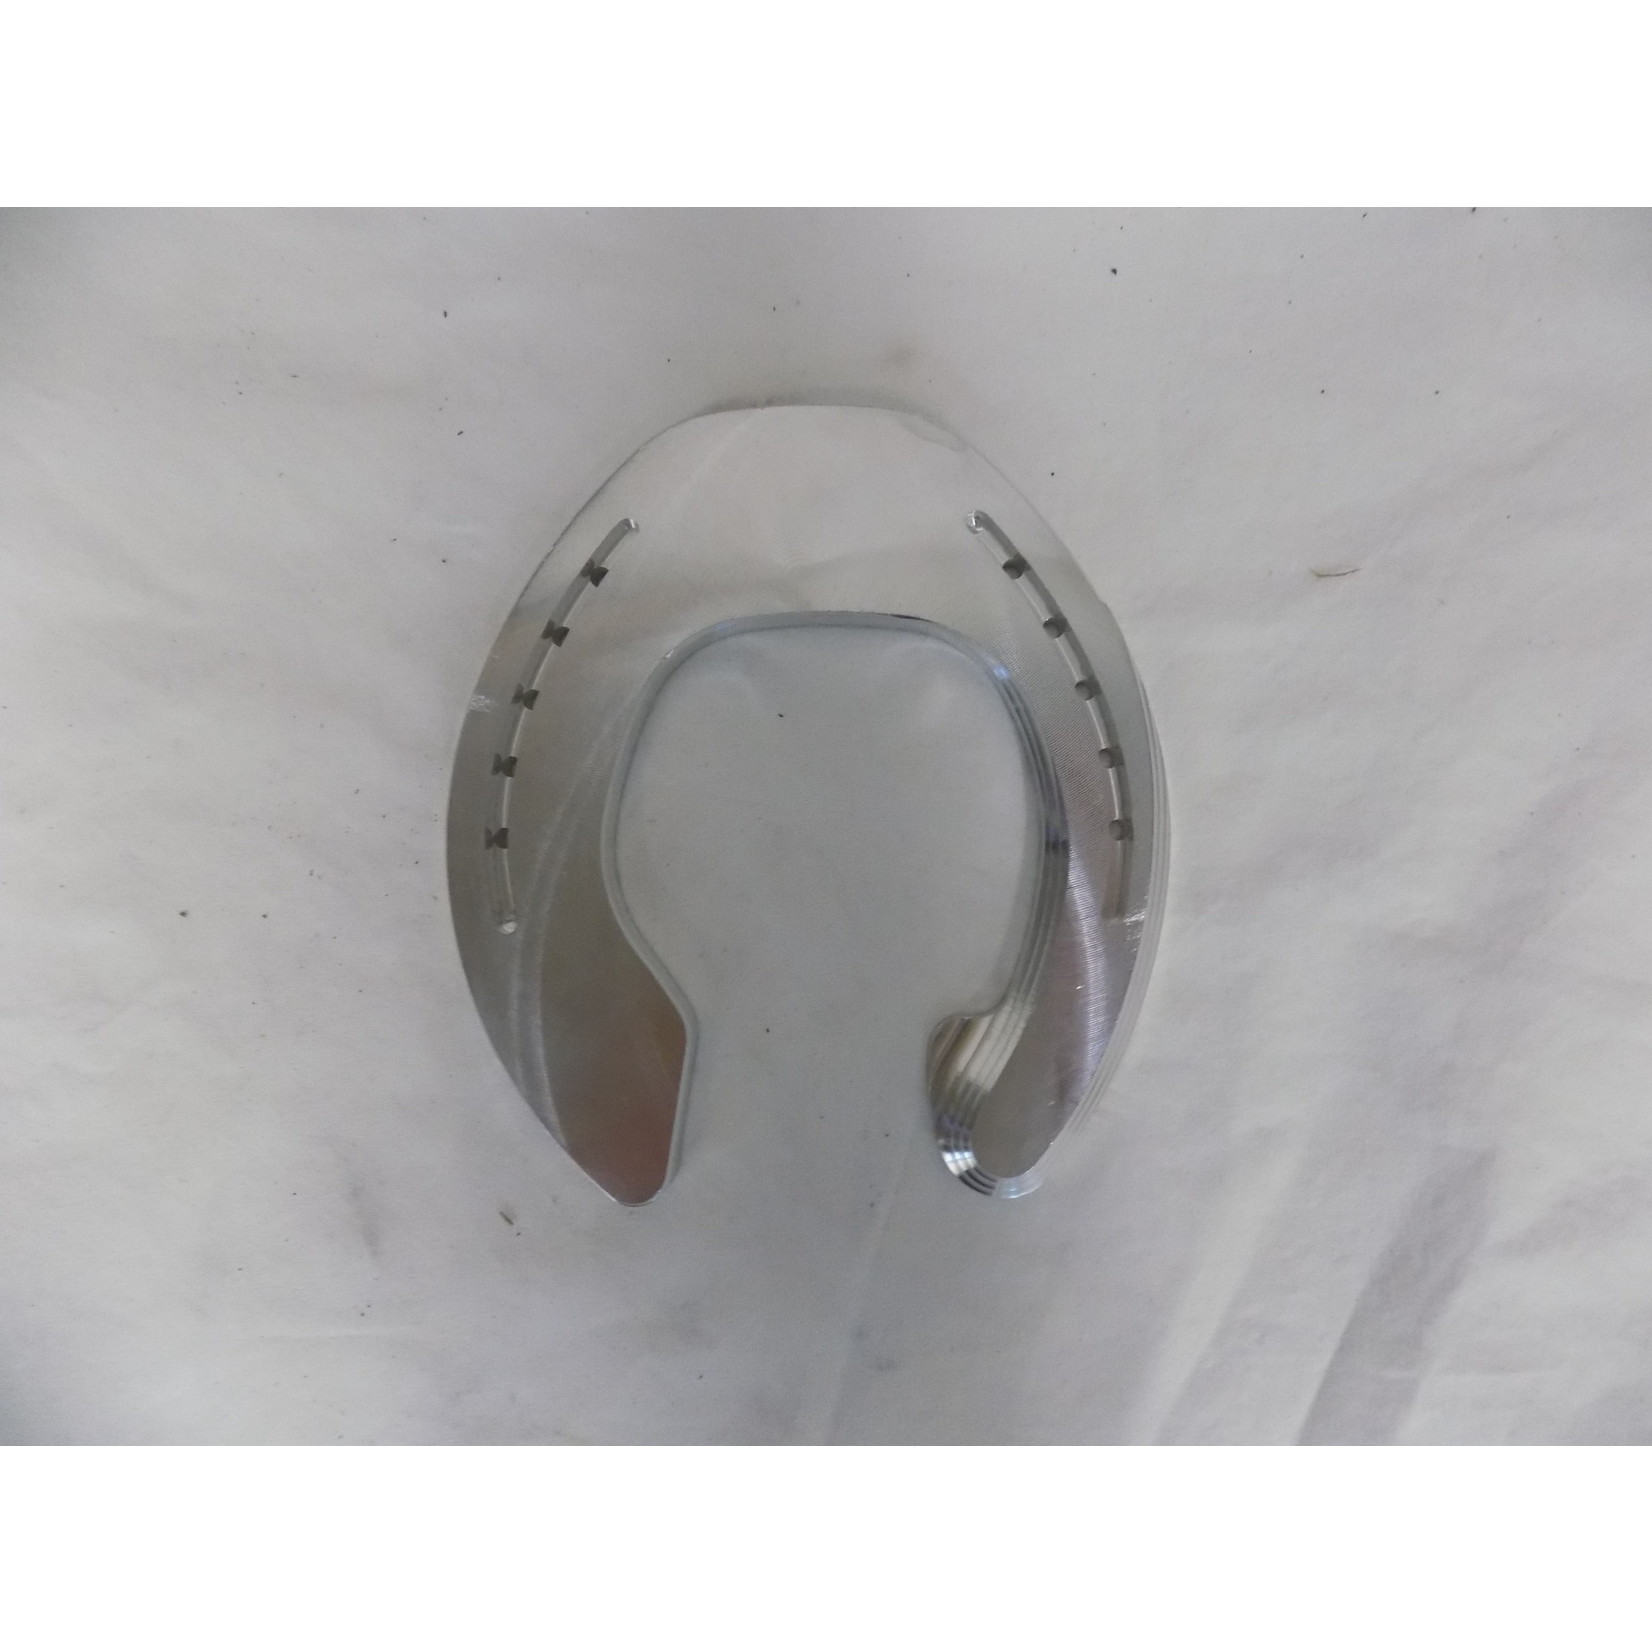 Grand Circuit Suspensory Hind Branch B Size 10 ea